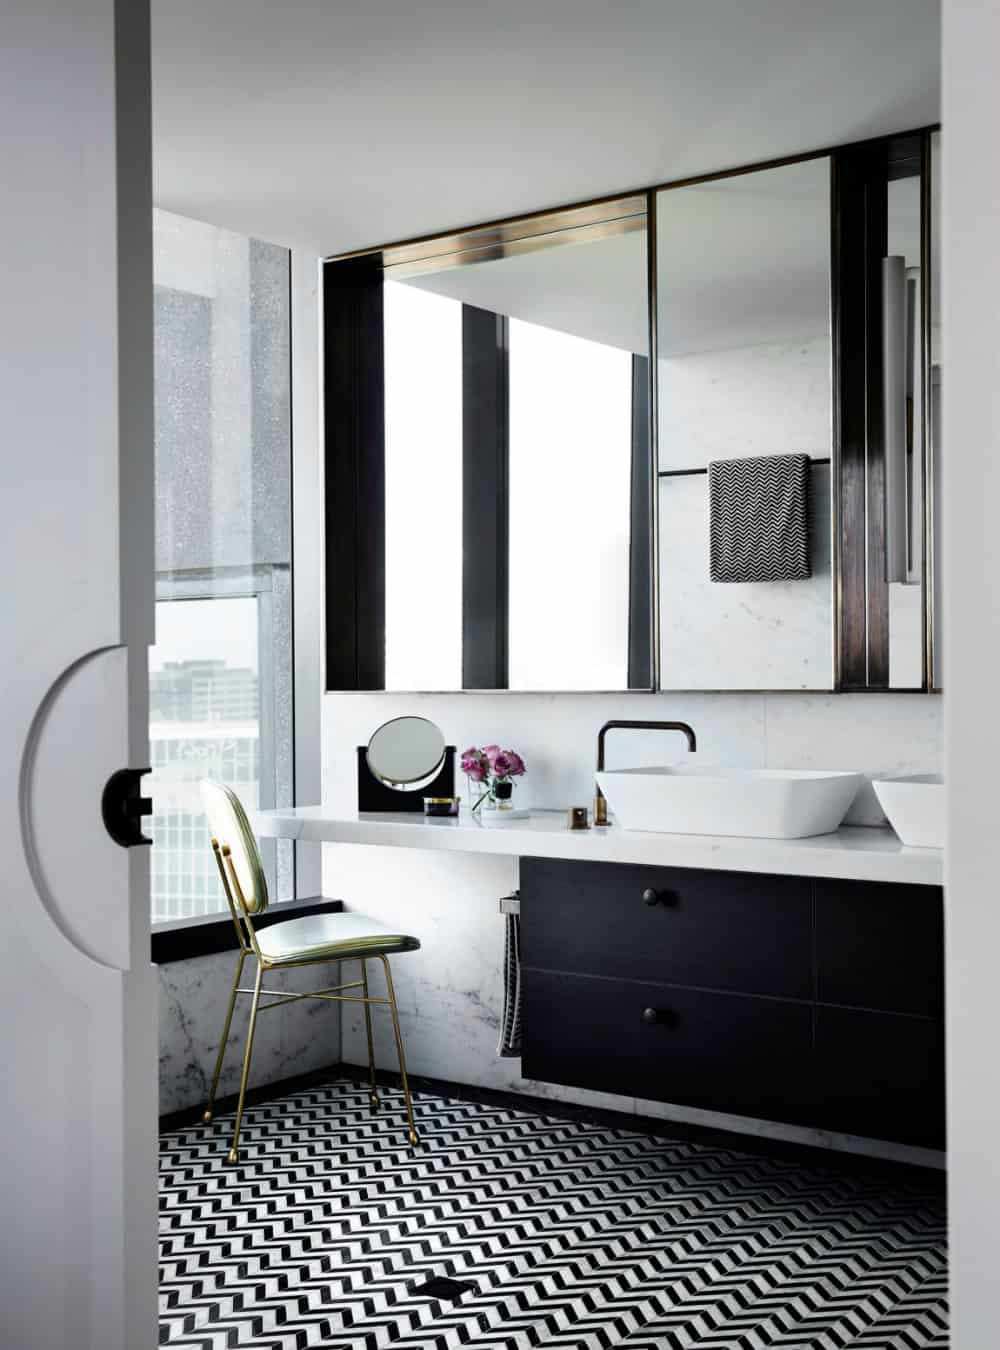 Spacious bathroom in black and white looks dreamy